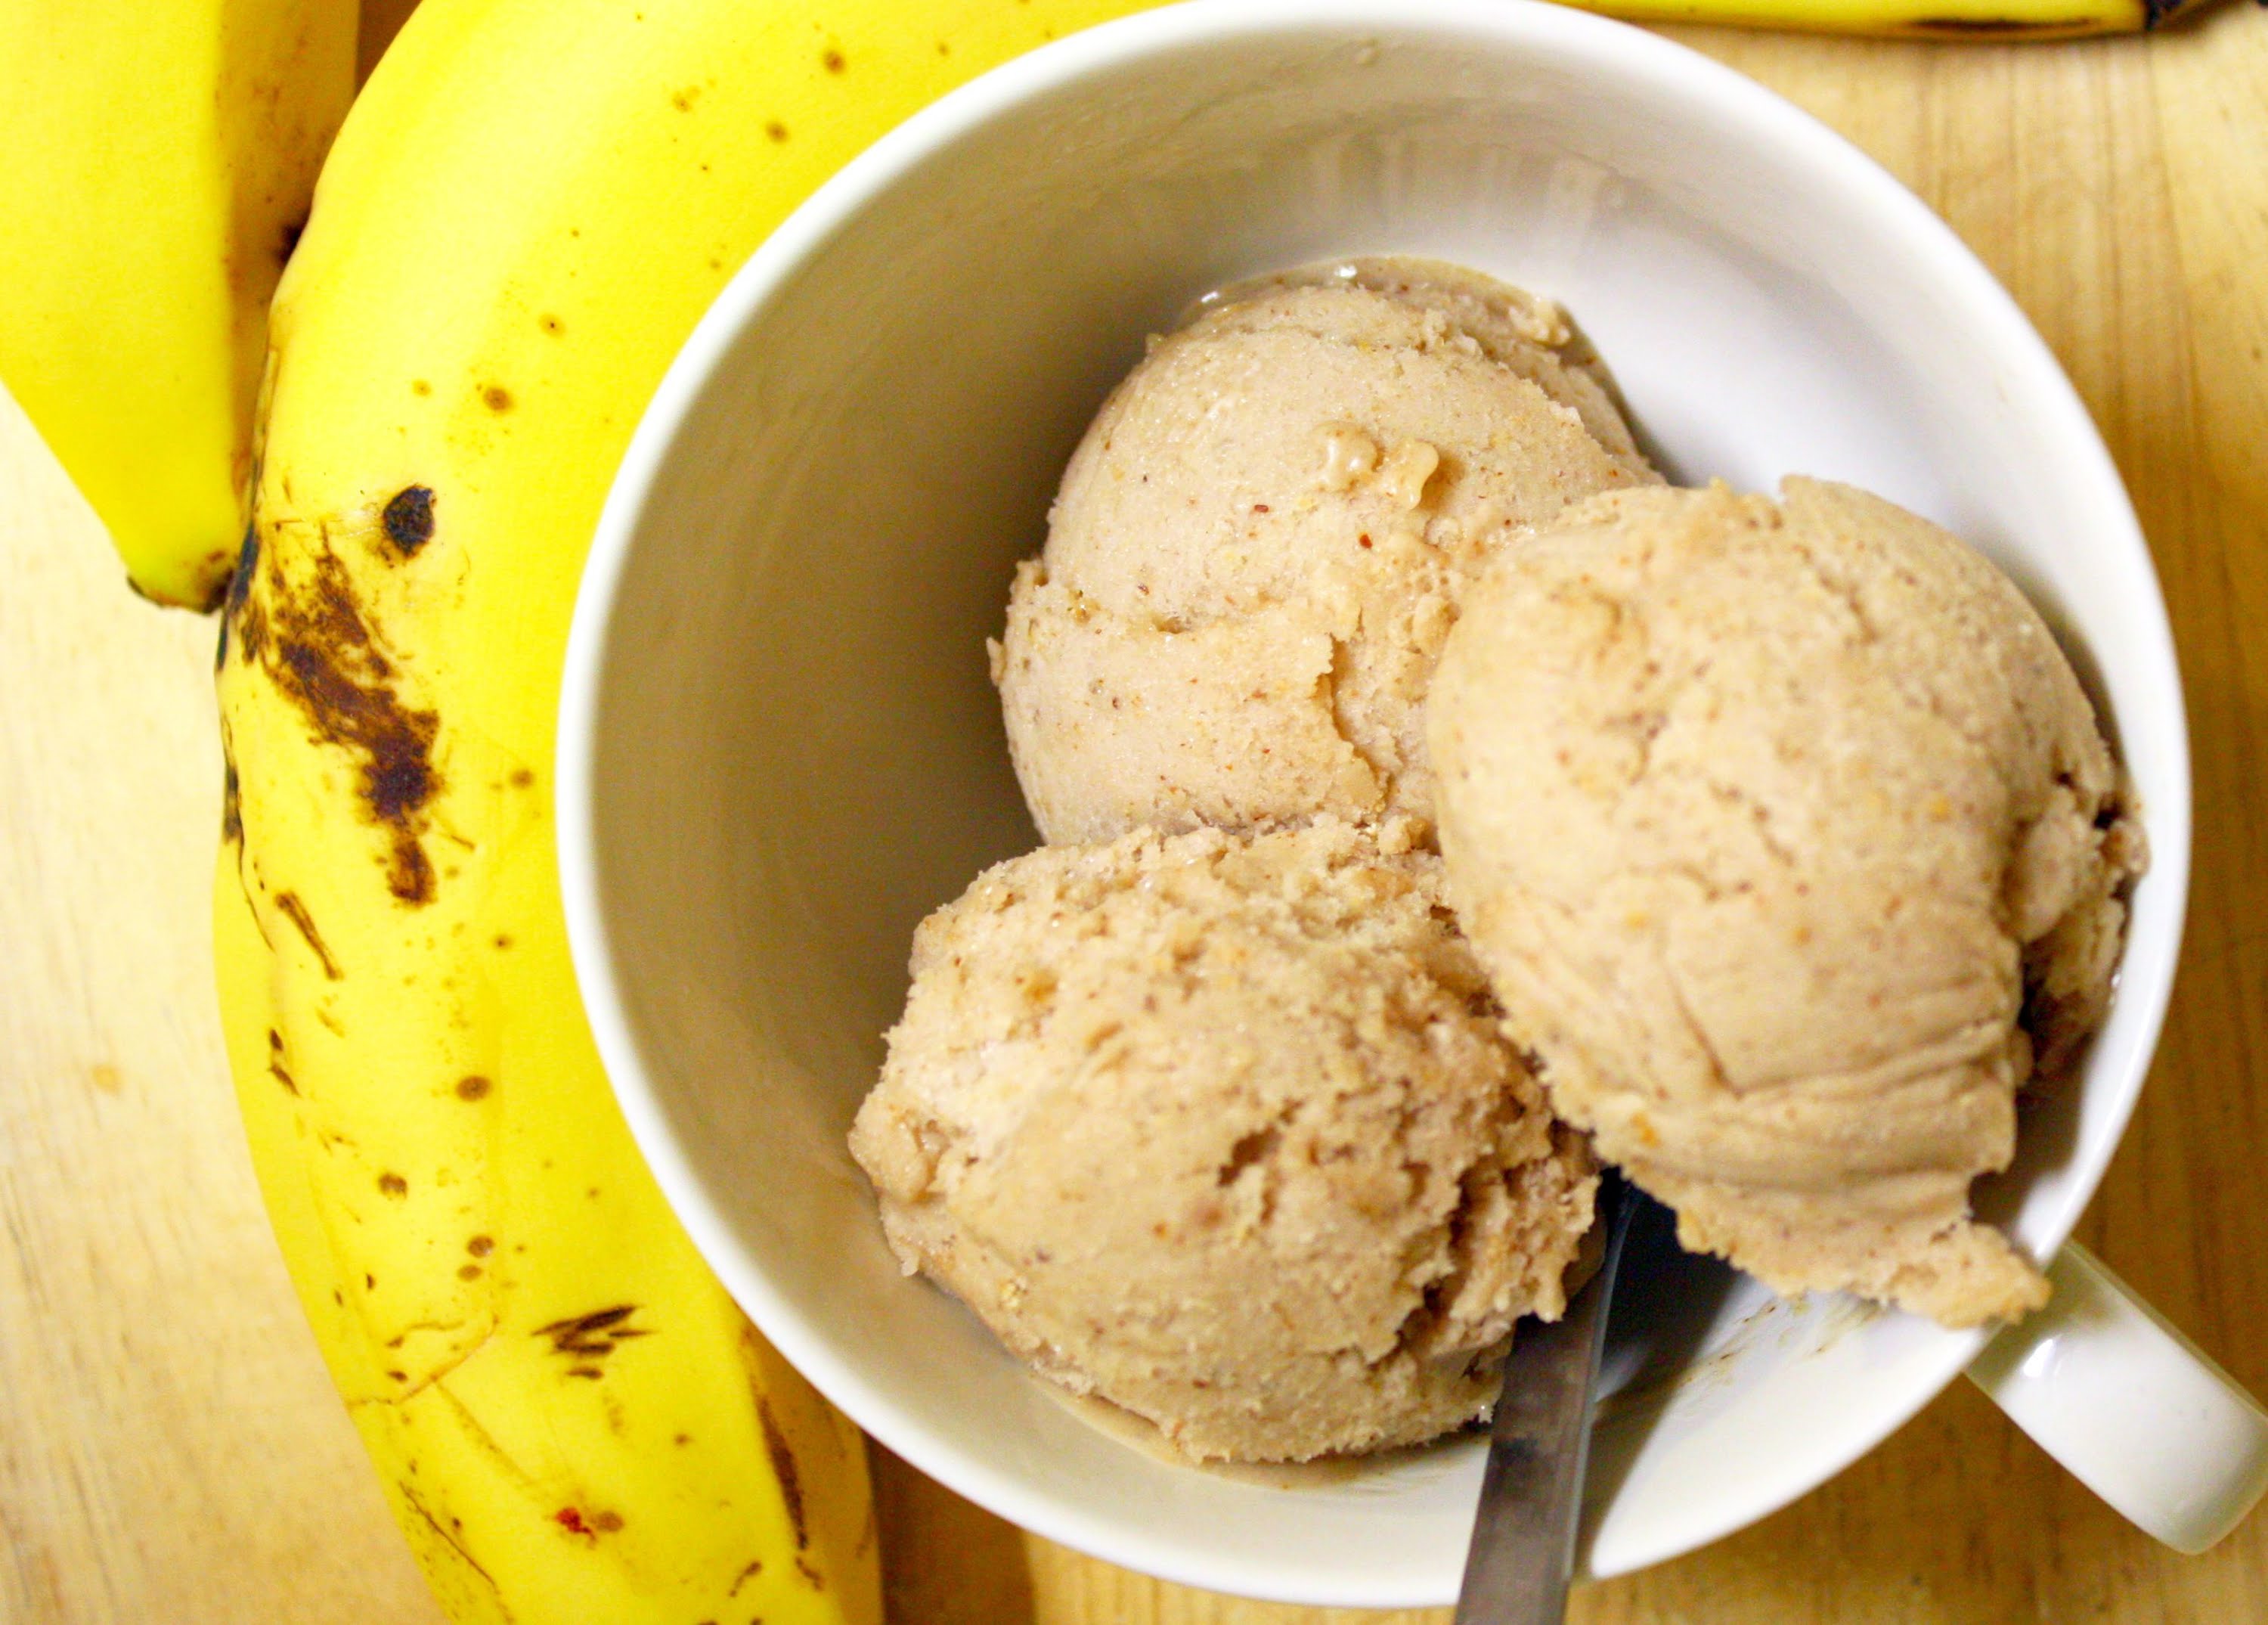 While it may seem odd, frozen bananas can help create a delicious treat to substitute traditional ice cream! (source)